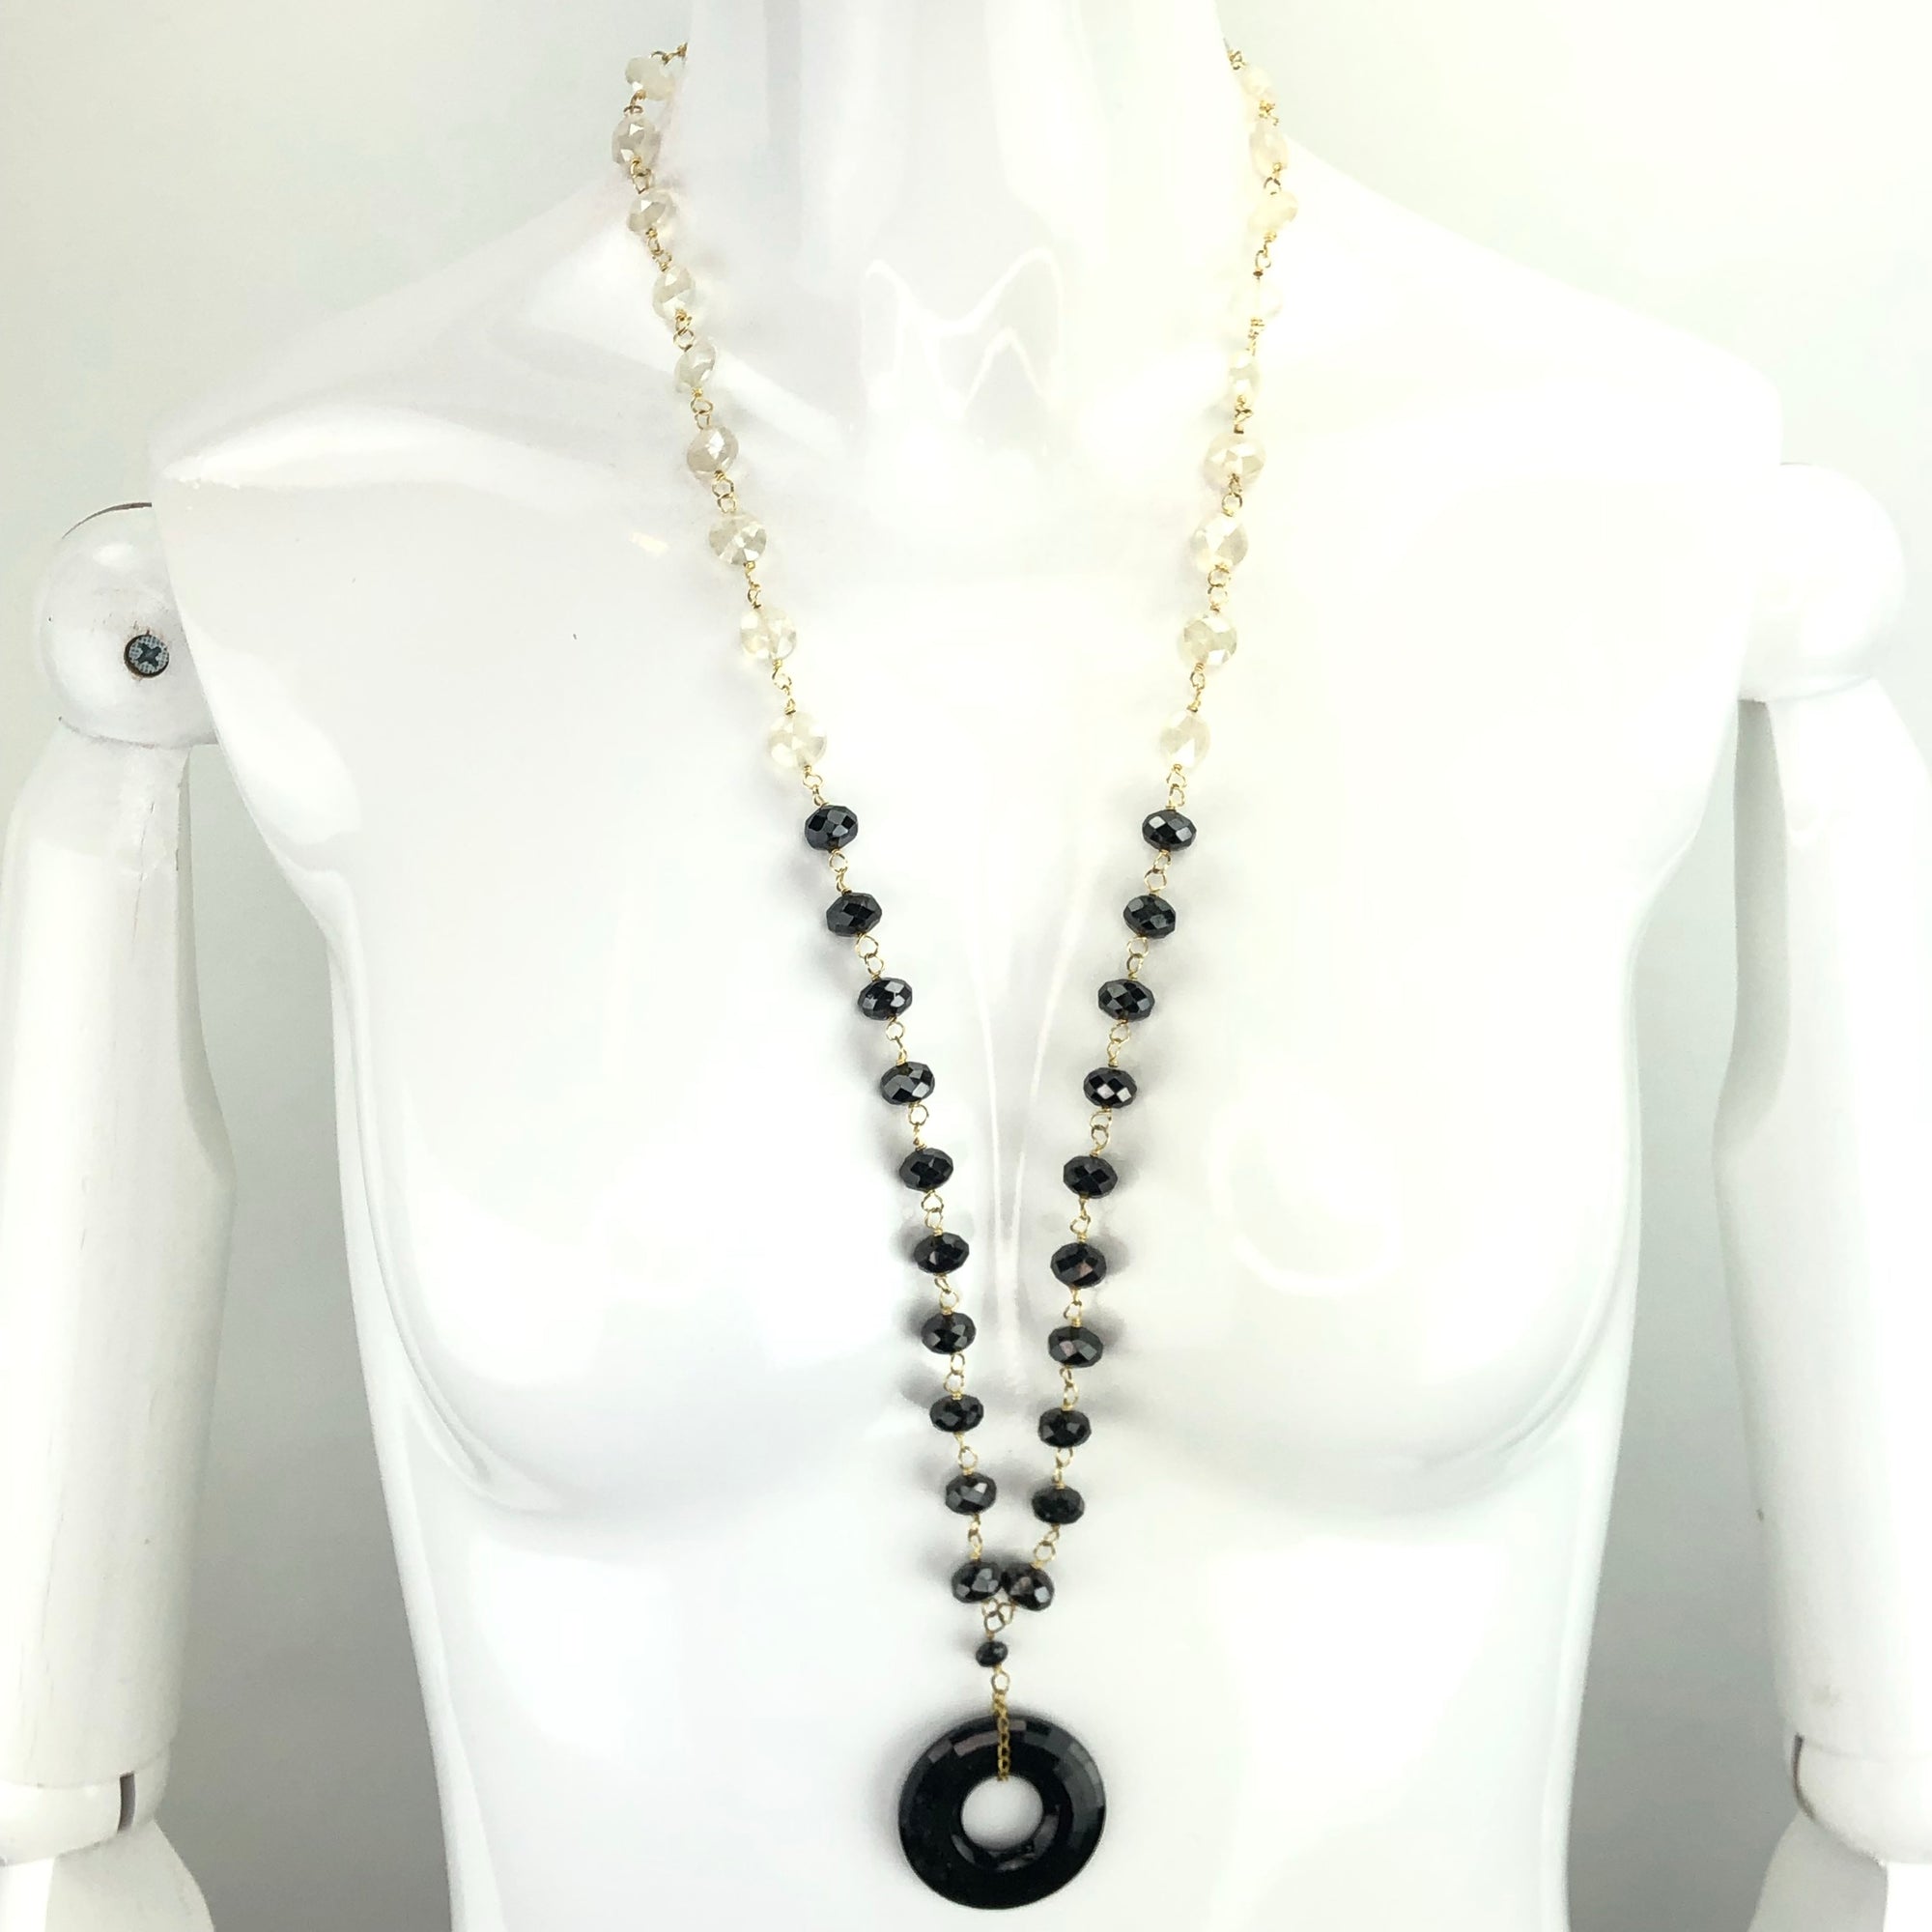 Mirrored Dimension Necklace Closet Sale Cerese D Jewelry   